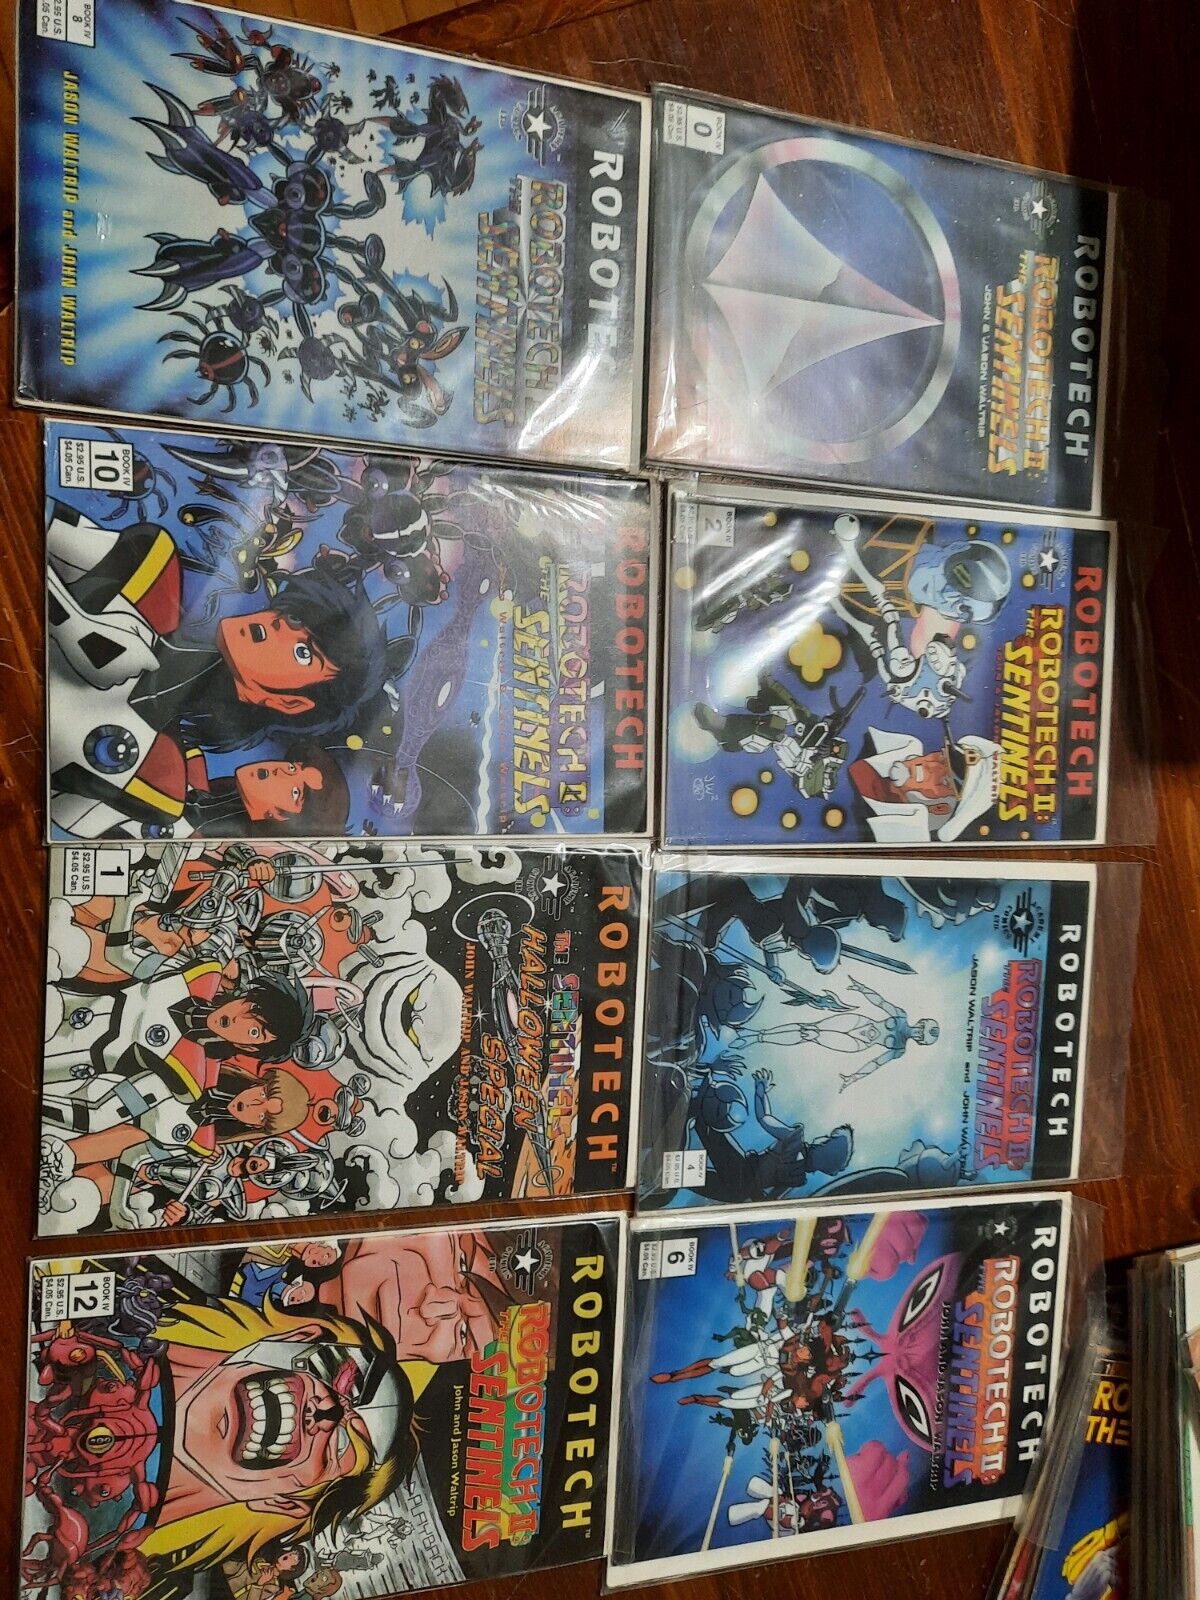 Robotech Sentinels Book 1, 2, 4 FULL SET with Assorted Academy/Eternity Robotech